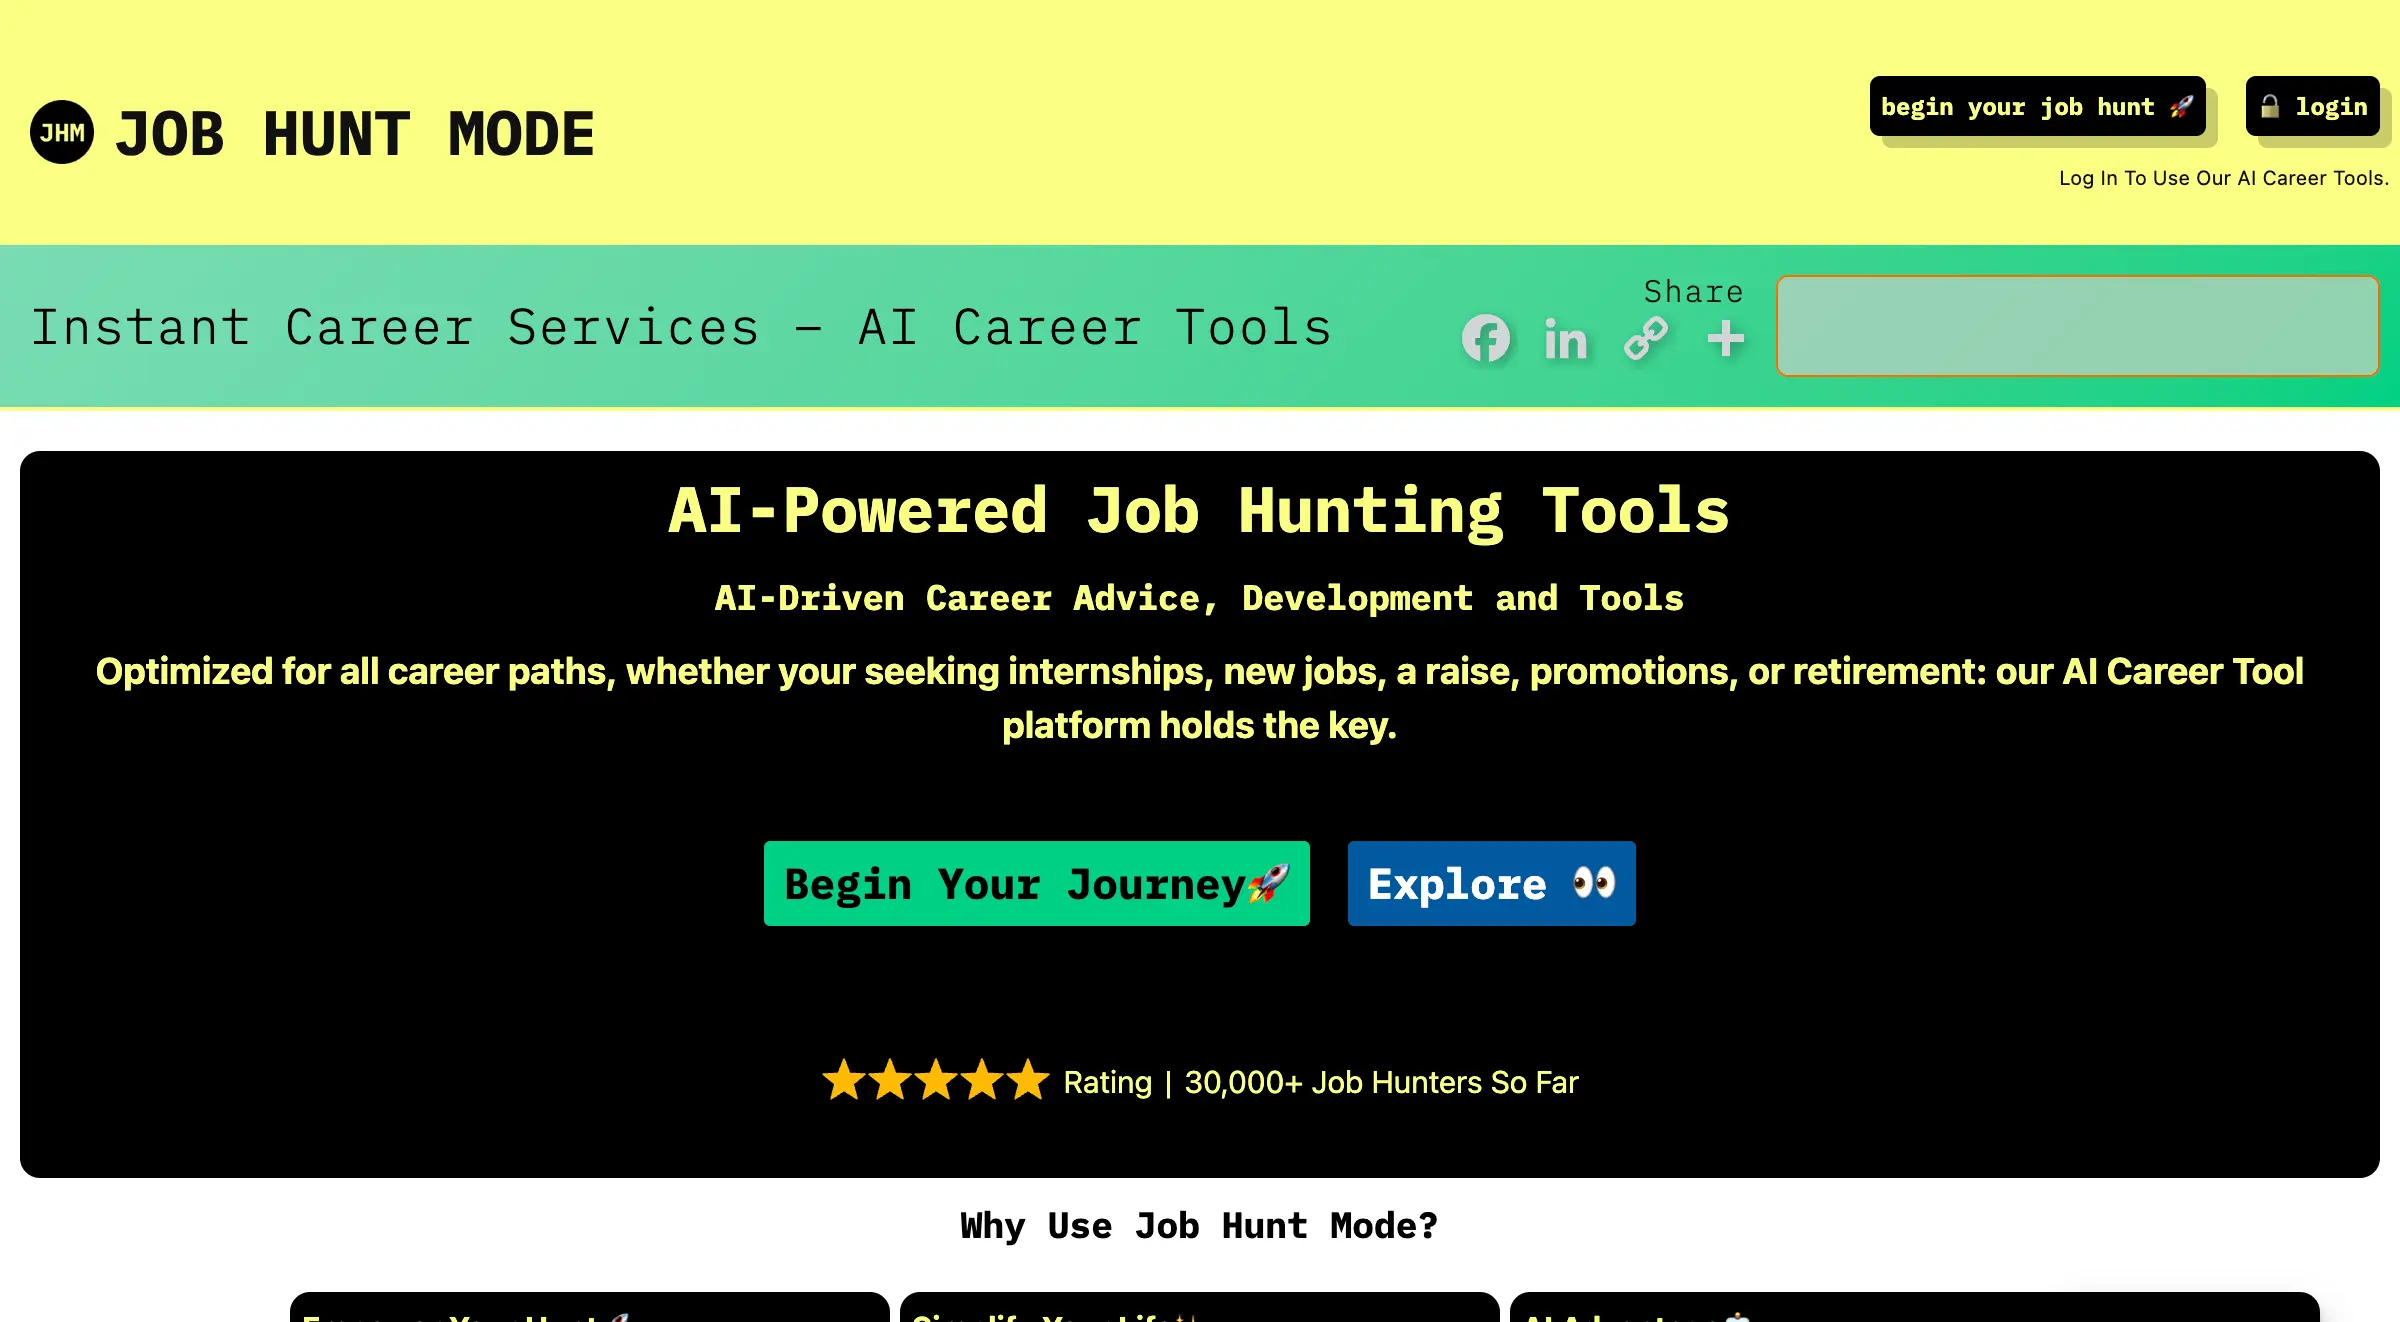 Instant Career Services - AI Career Tools